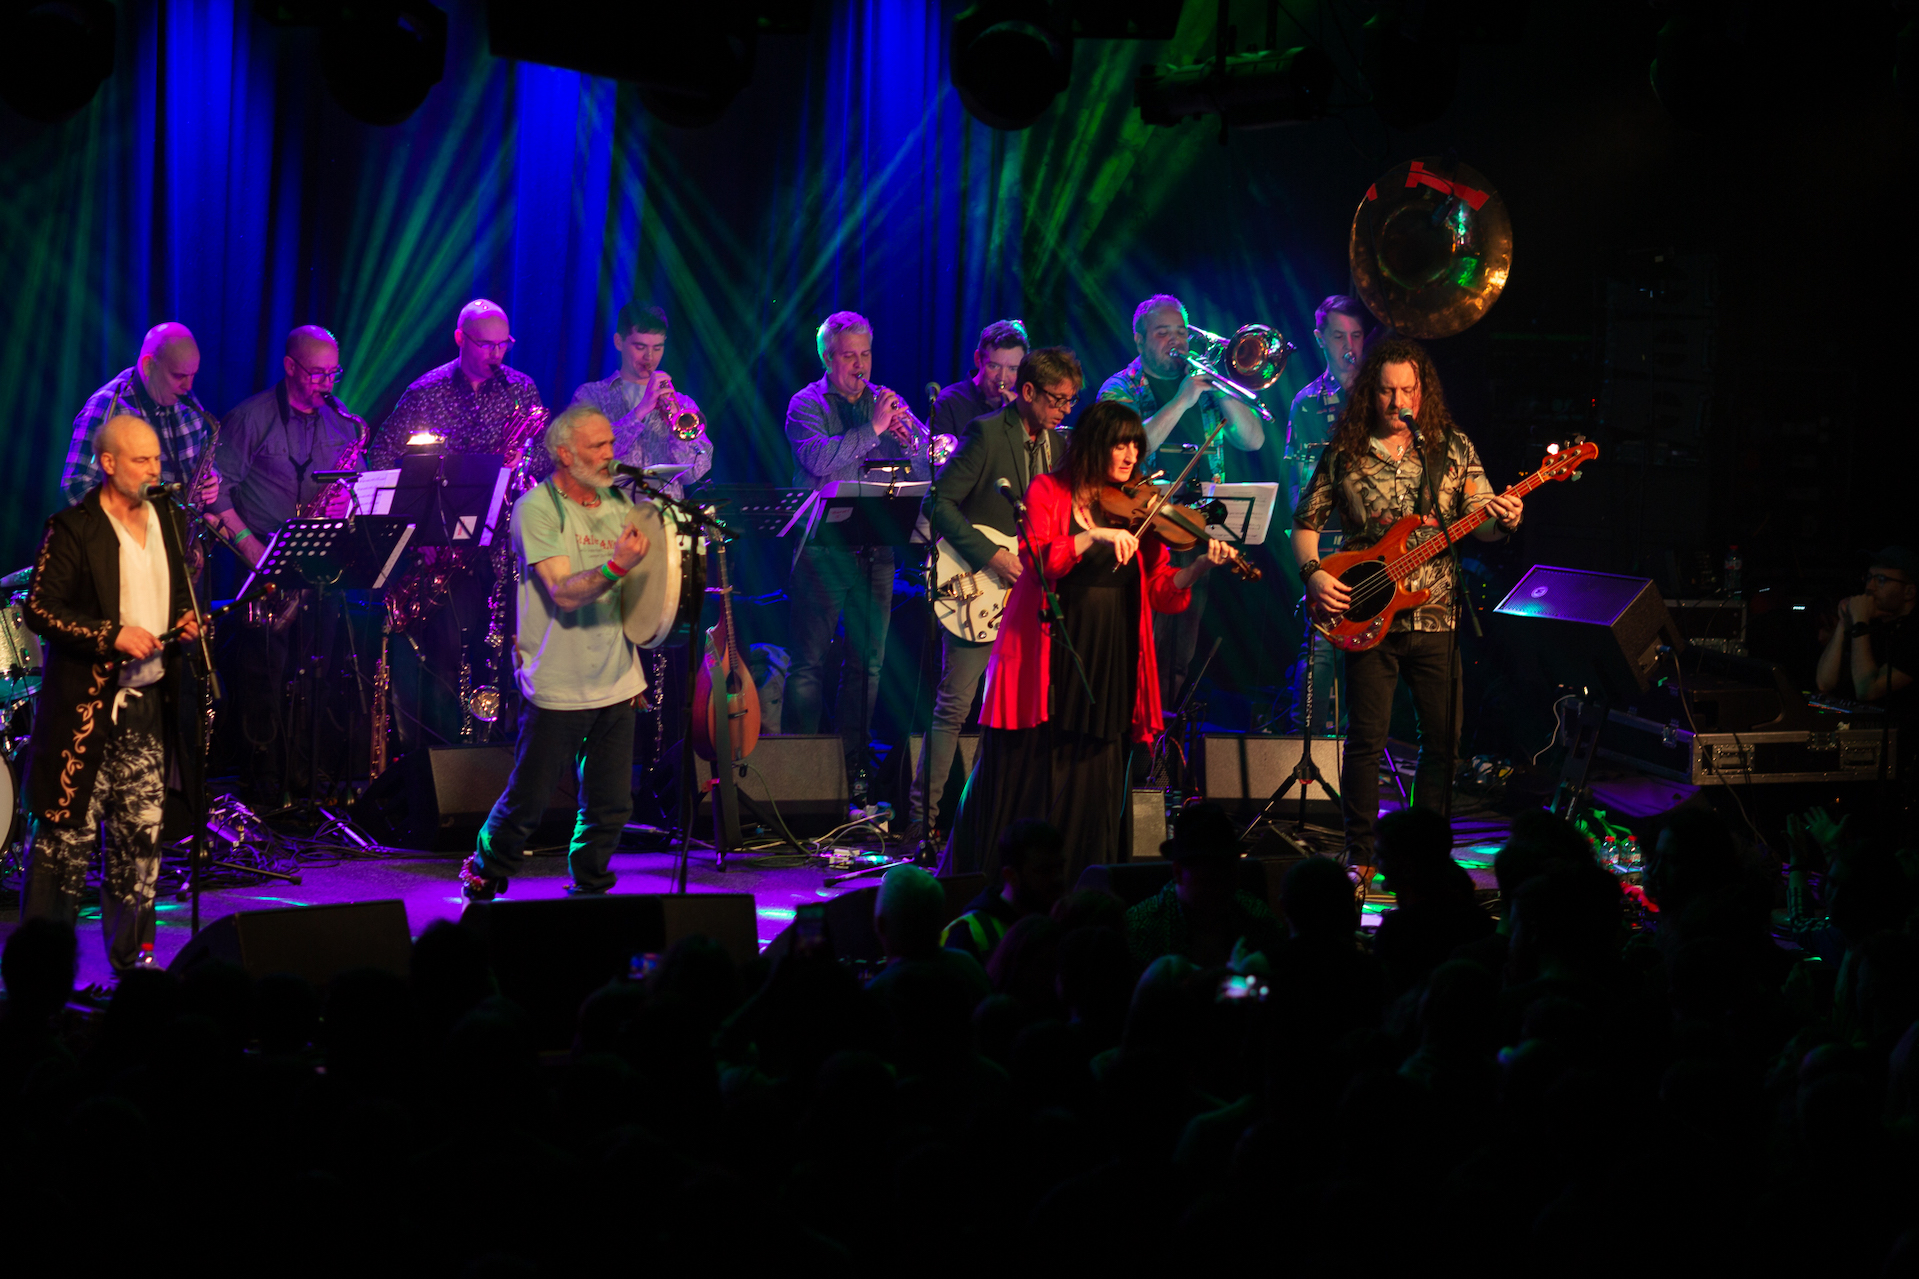 On a stage, a line of musicians at the back playing brass and wind instruments, in front more musicians playing guitars, fiddle.